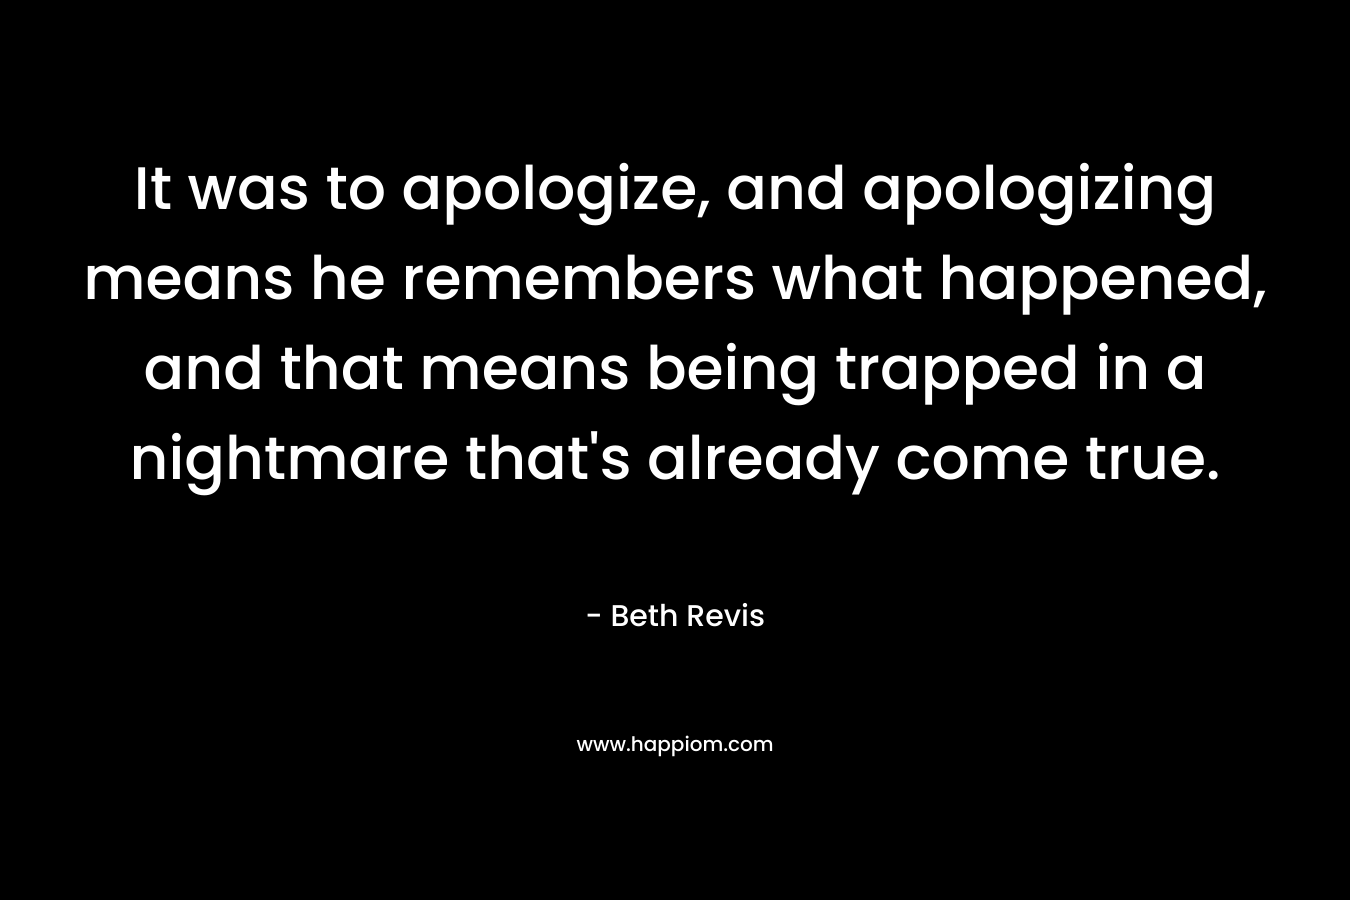 It was to apologize, and apologizing means he remembers what happened, and that means being trapped in a nightmare that’s already come true. – Beth Revis